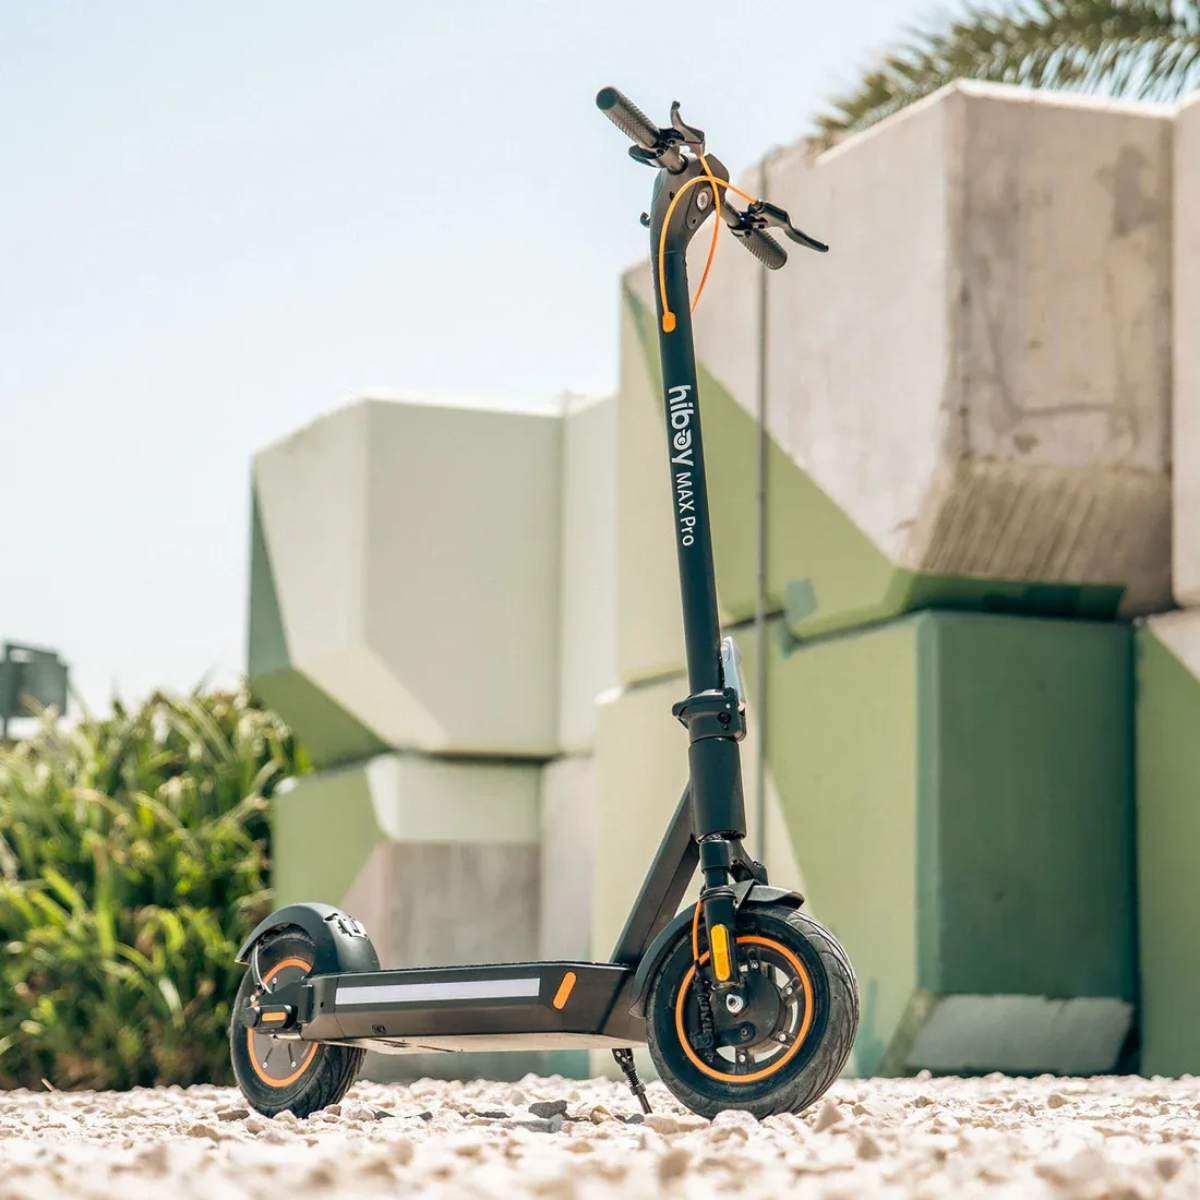 Hiboy MAX Electric Scooter